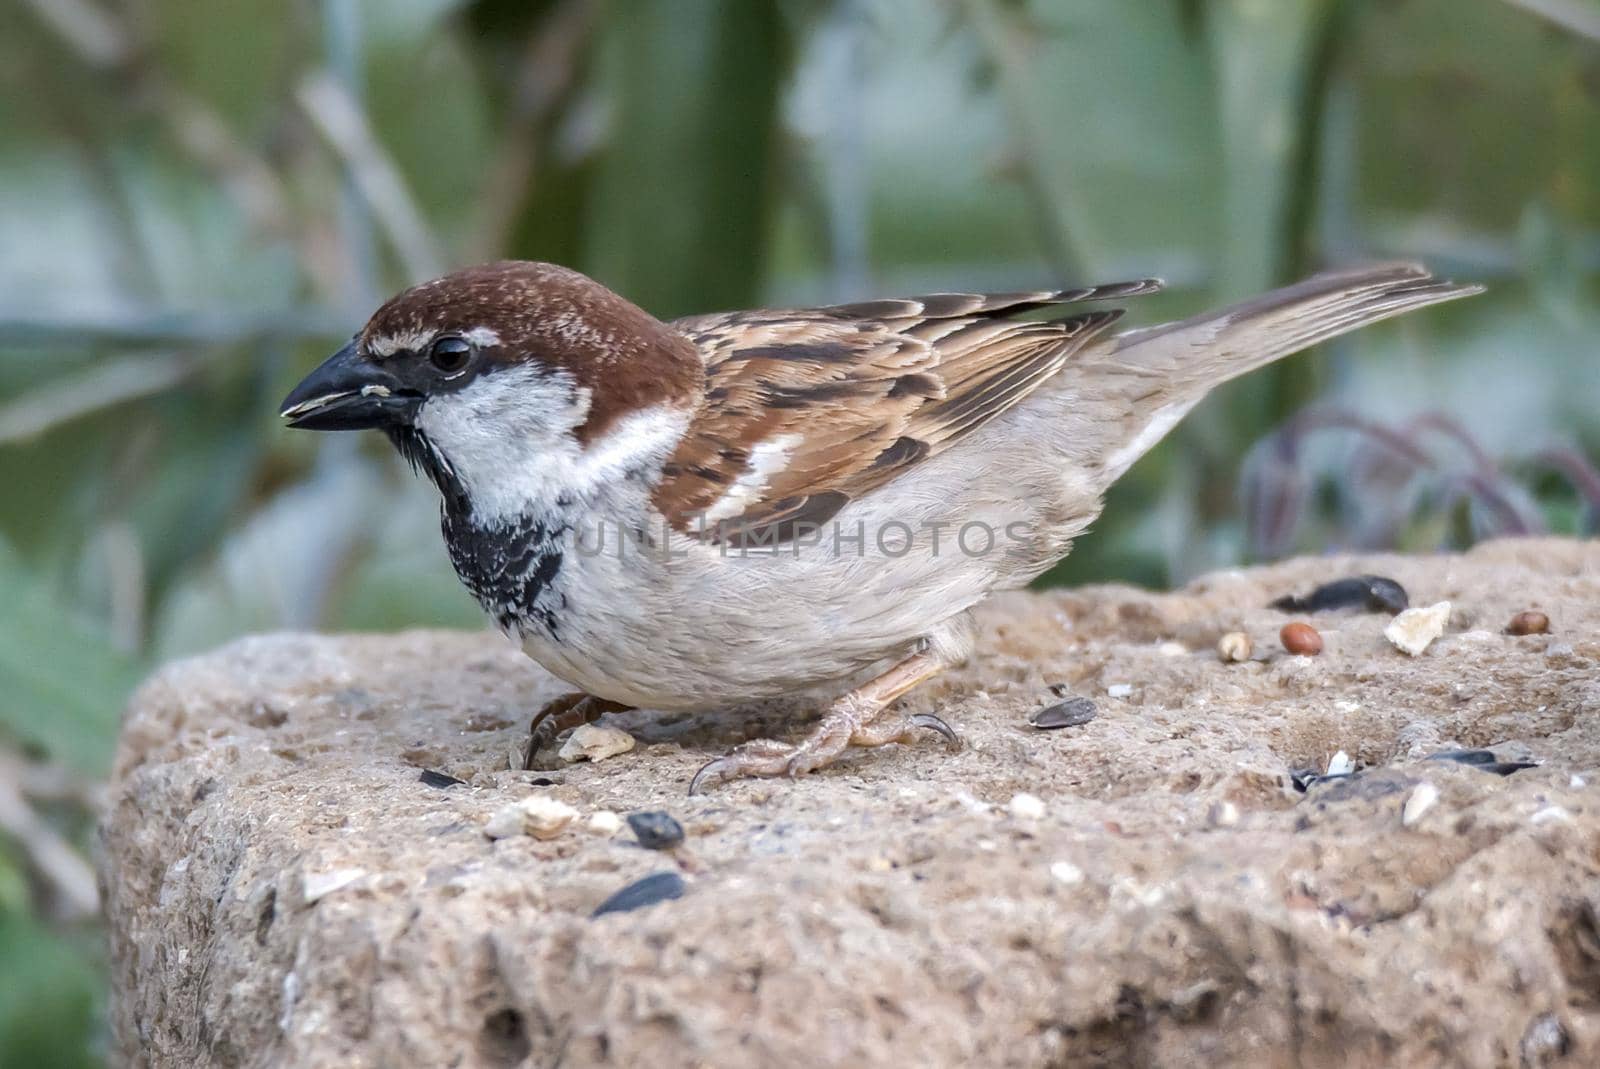 Sparrow resting on a log to eat in the morning